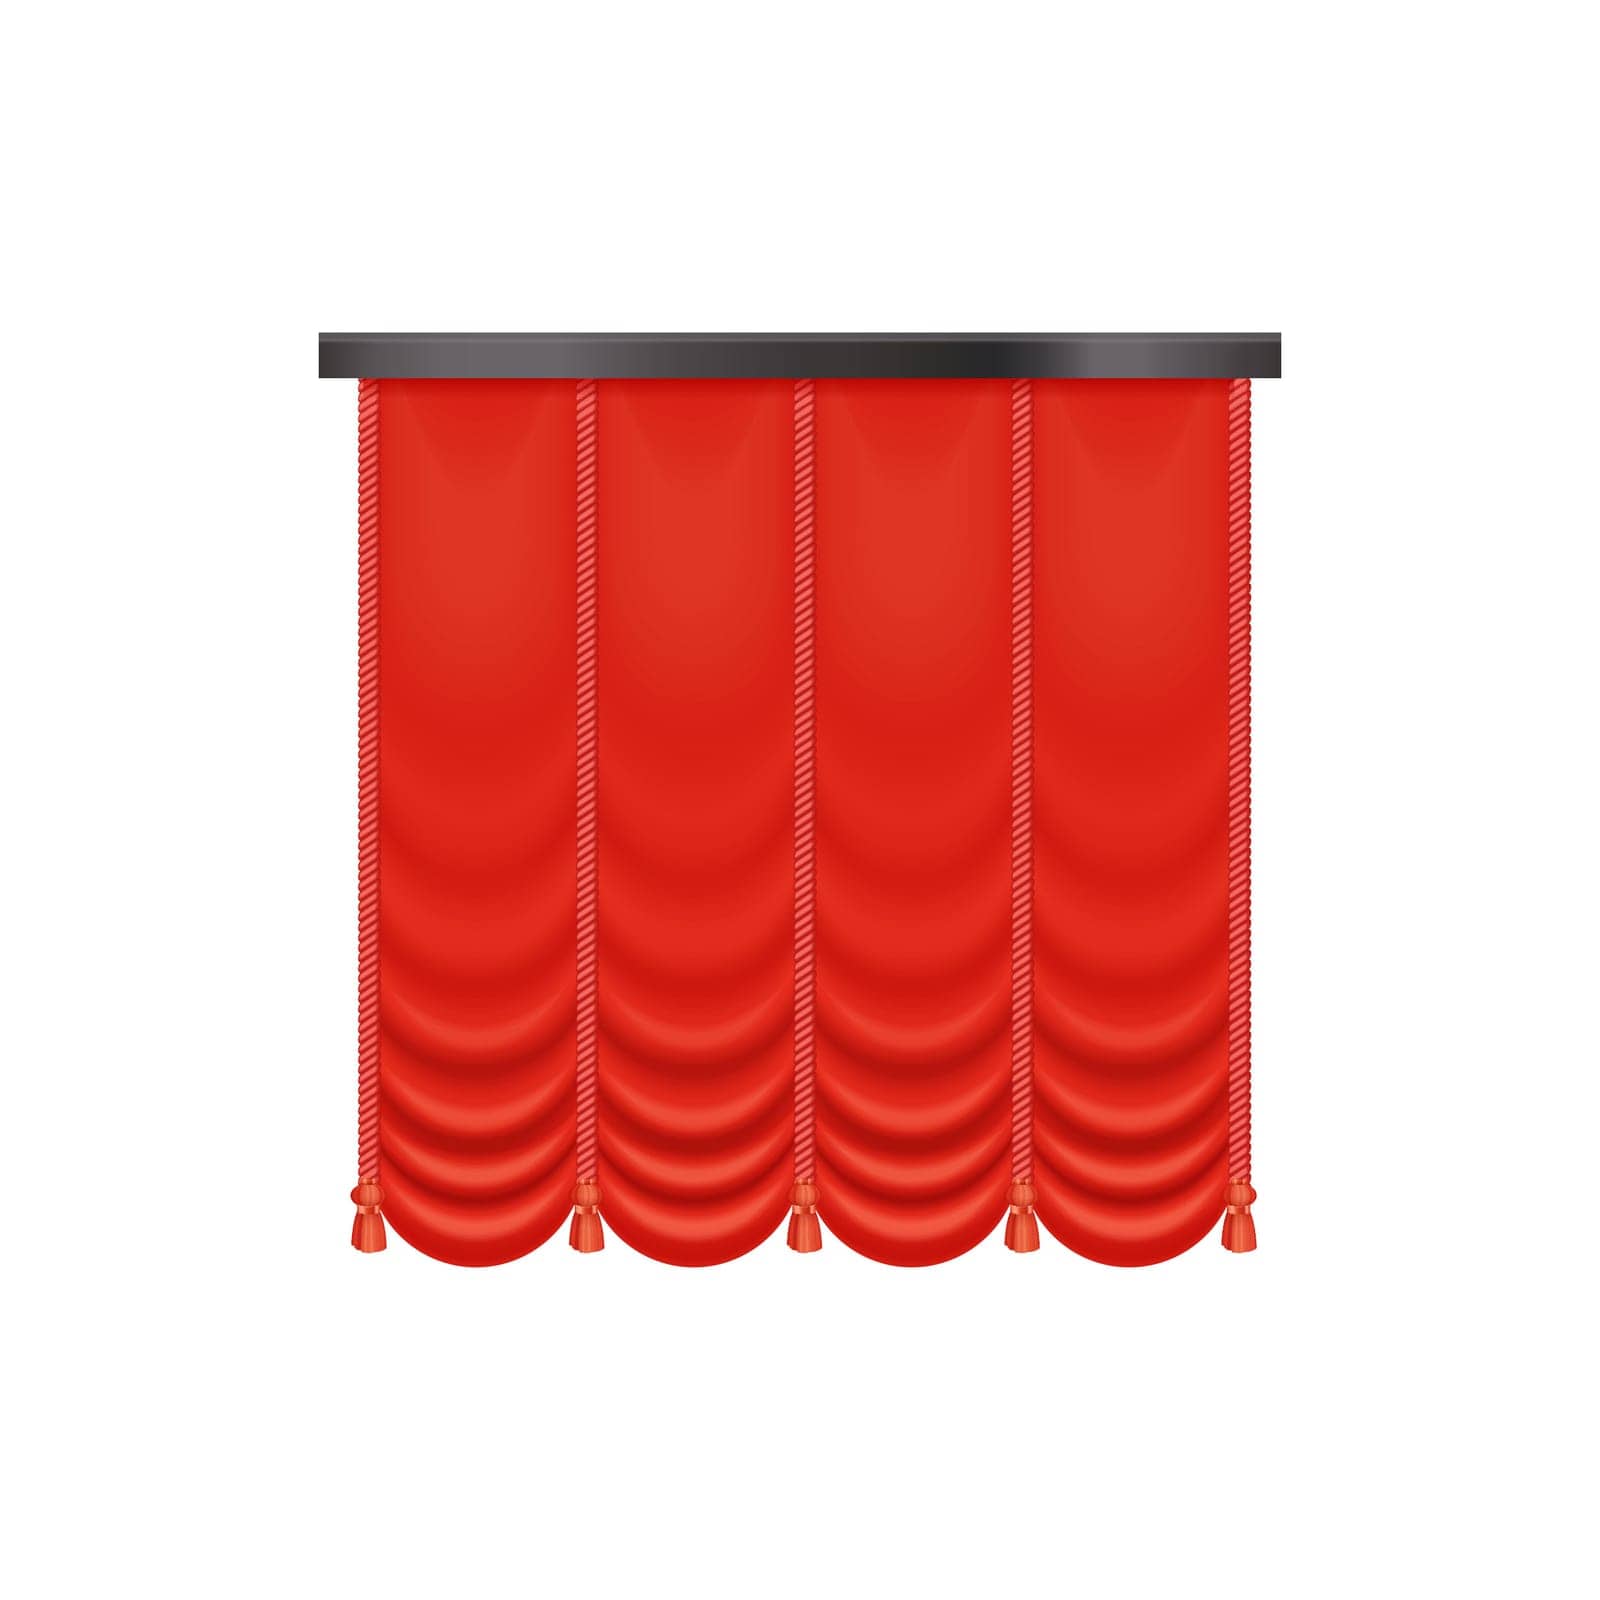 Red velvet, of satin closed curtains with 3D drapery for theatre stage, show or movie vector illustration